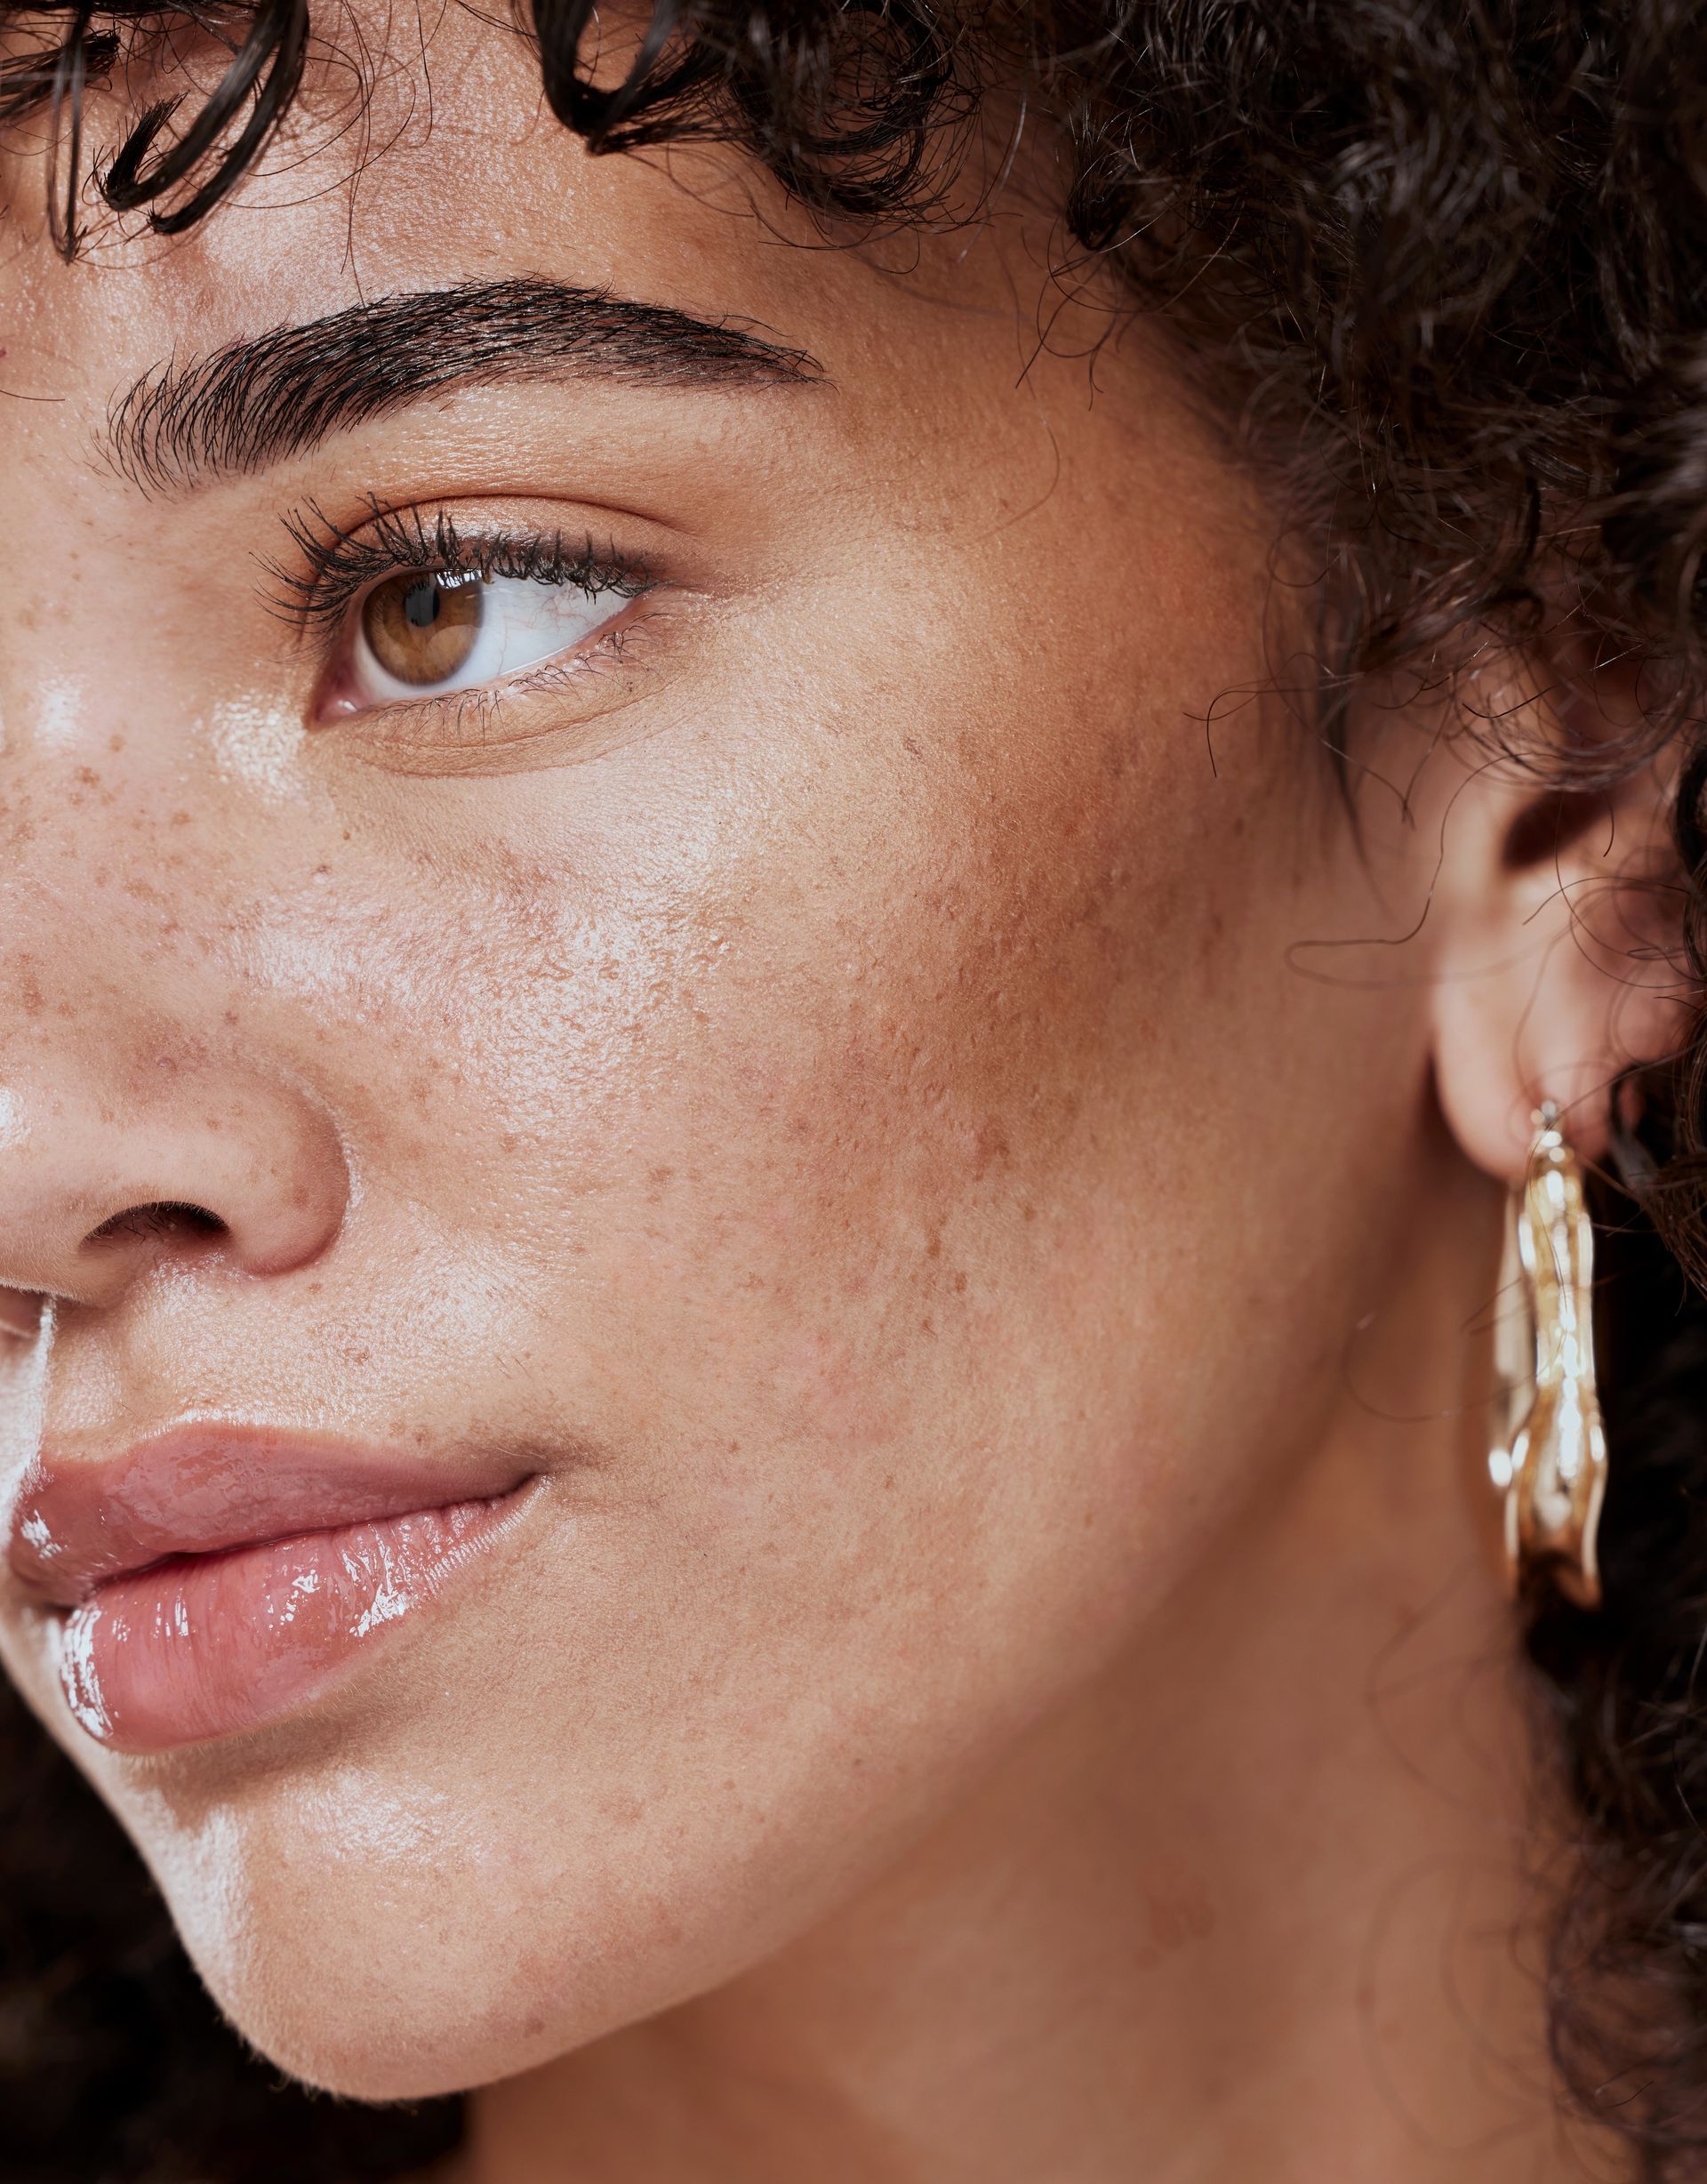 a close up of a woman 's face wearing hoop earrings